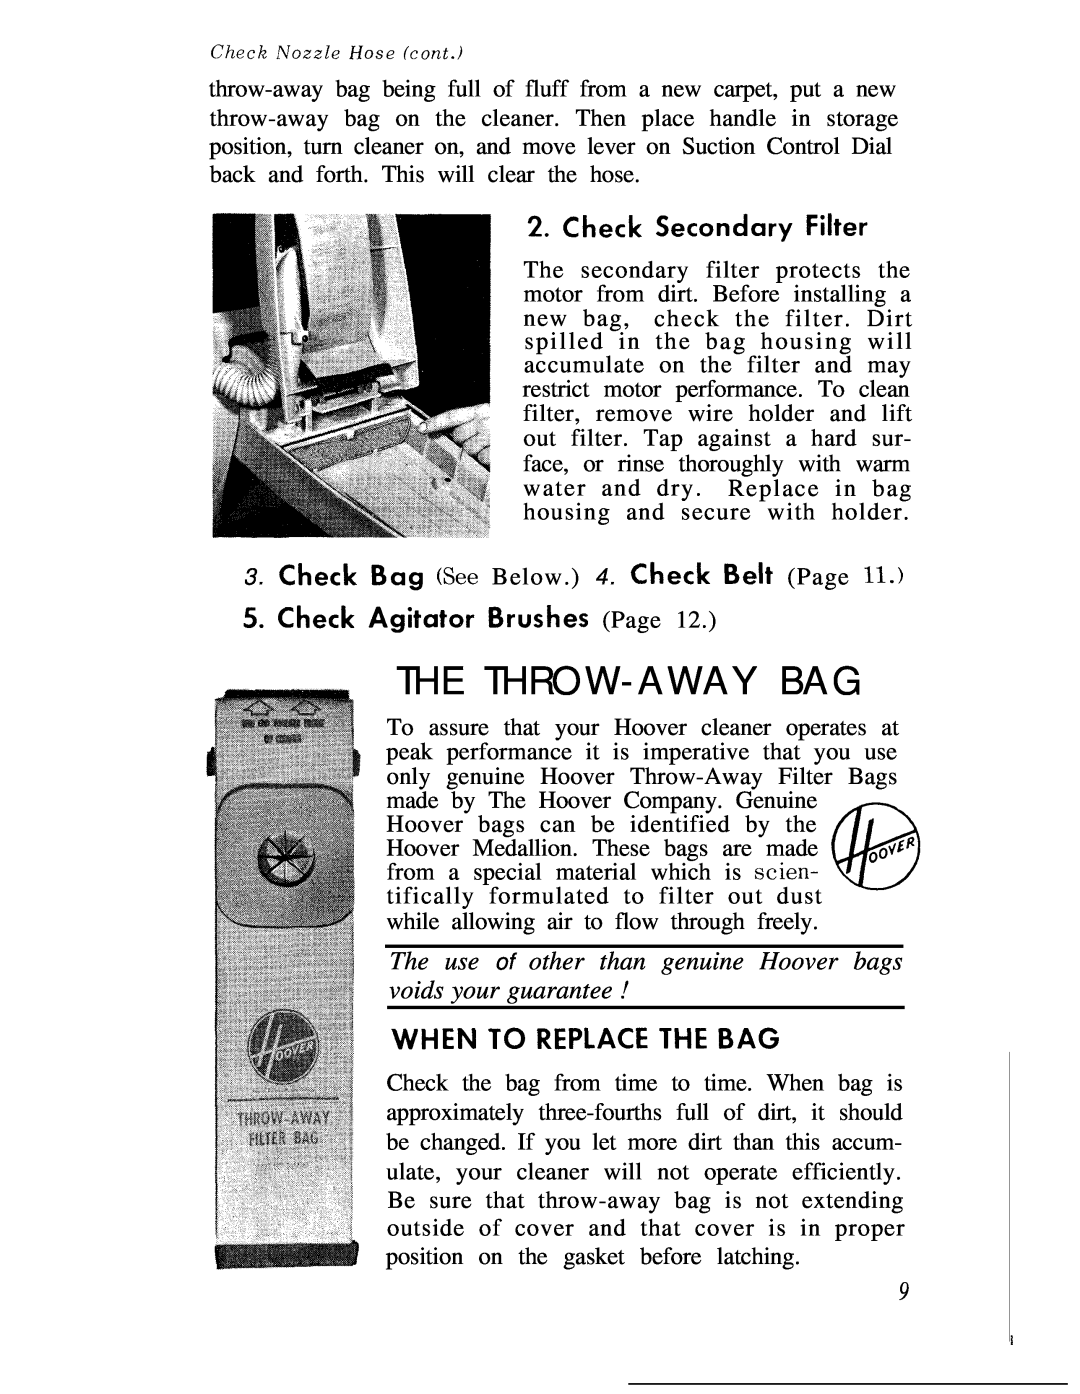 Hoover 1100 The Throw-Away Bag, The use of other than genuine Hoover bags voids your guarantee, Check Secondary Filter 